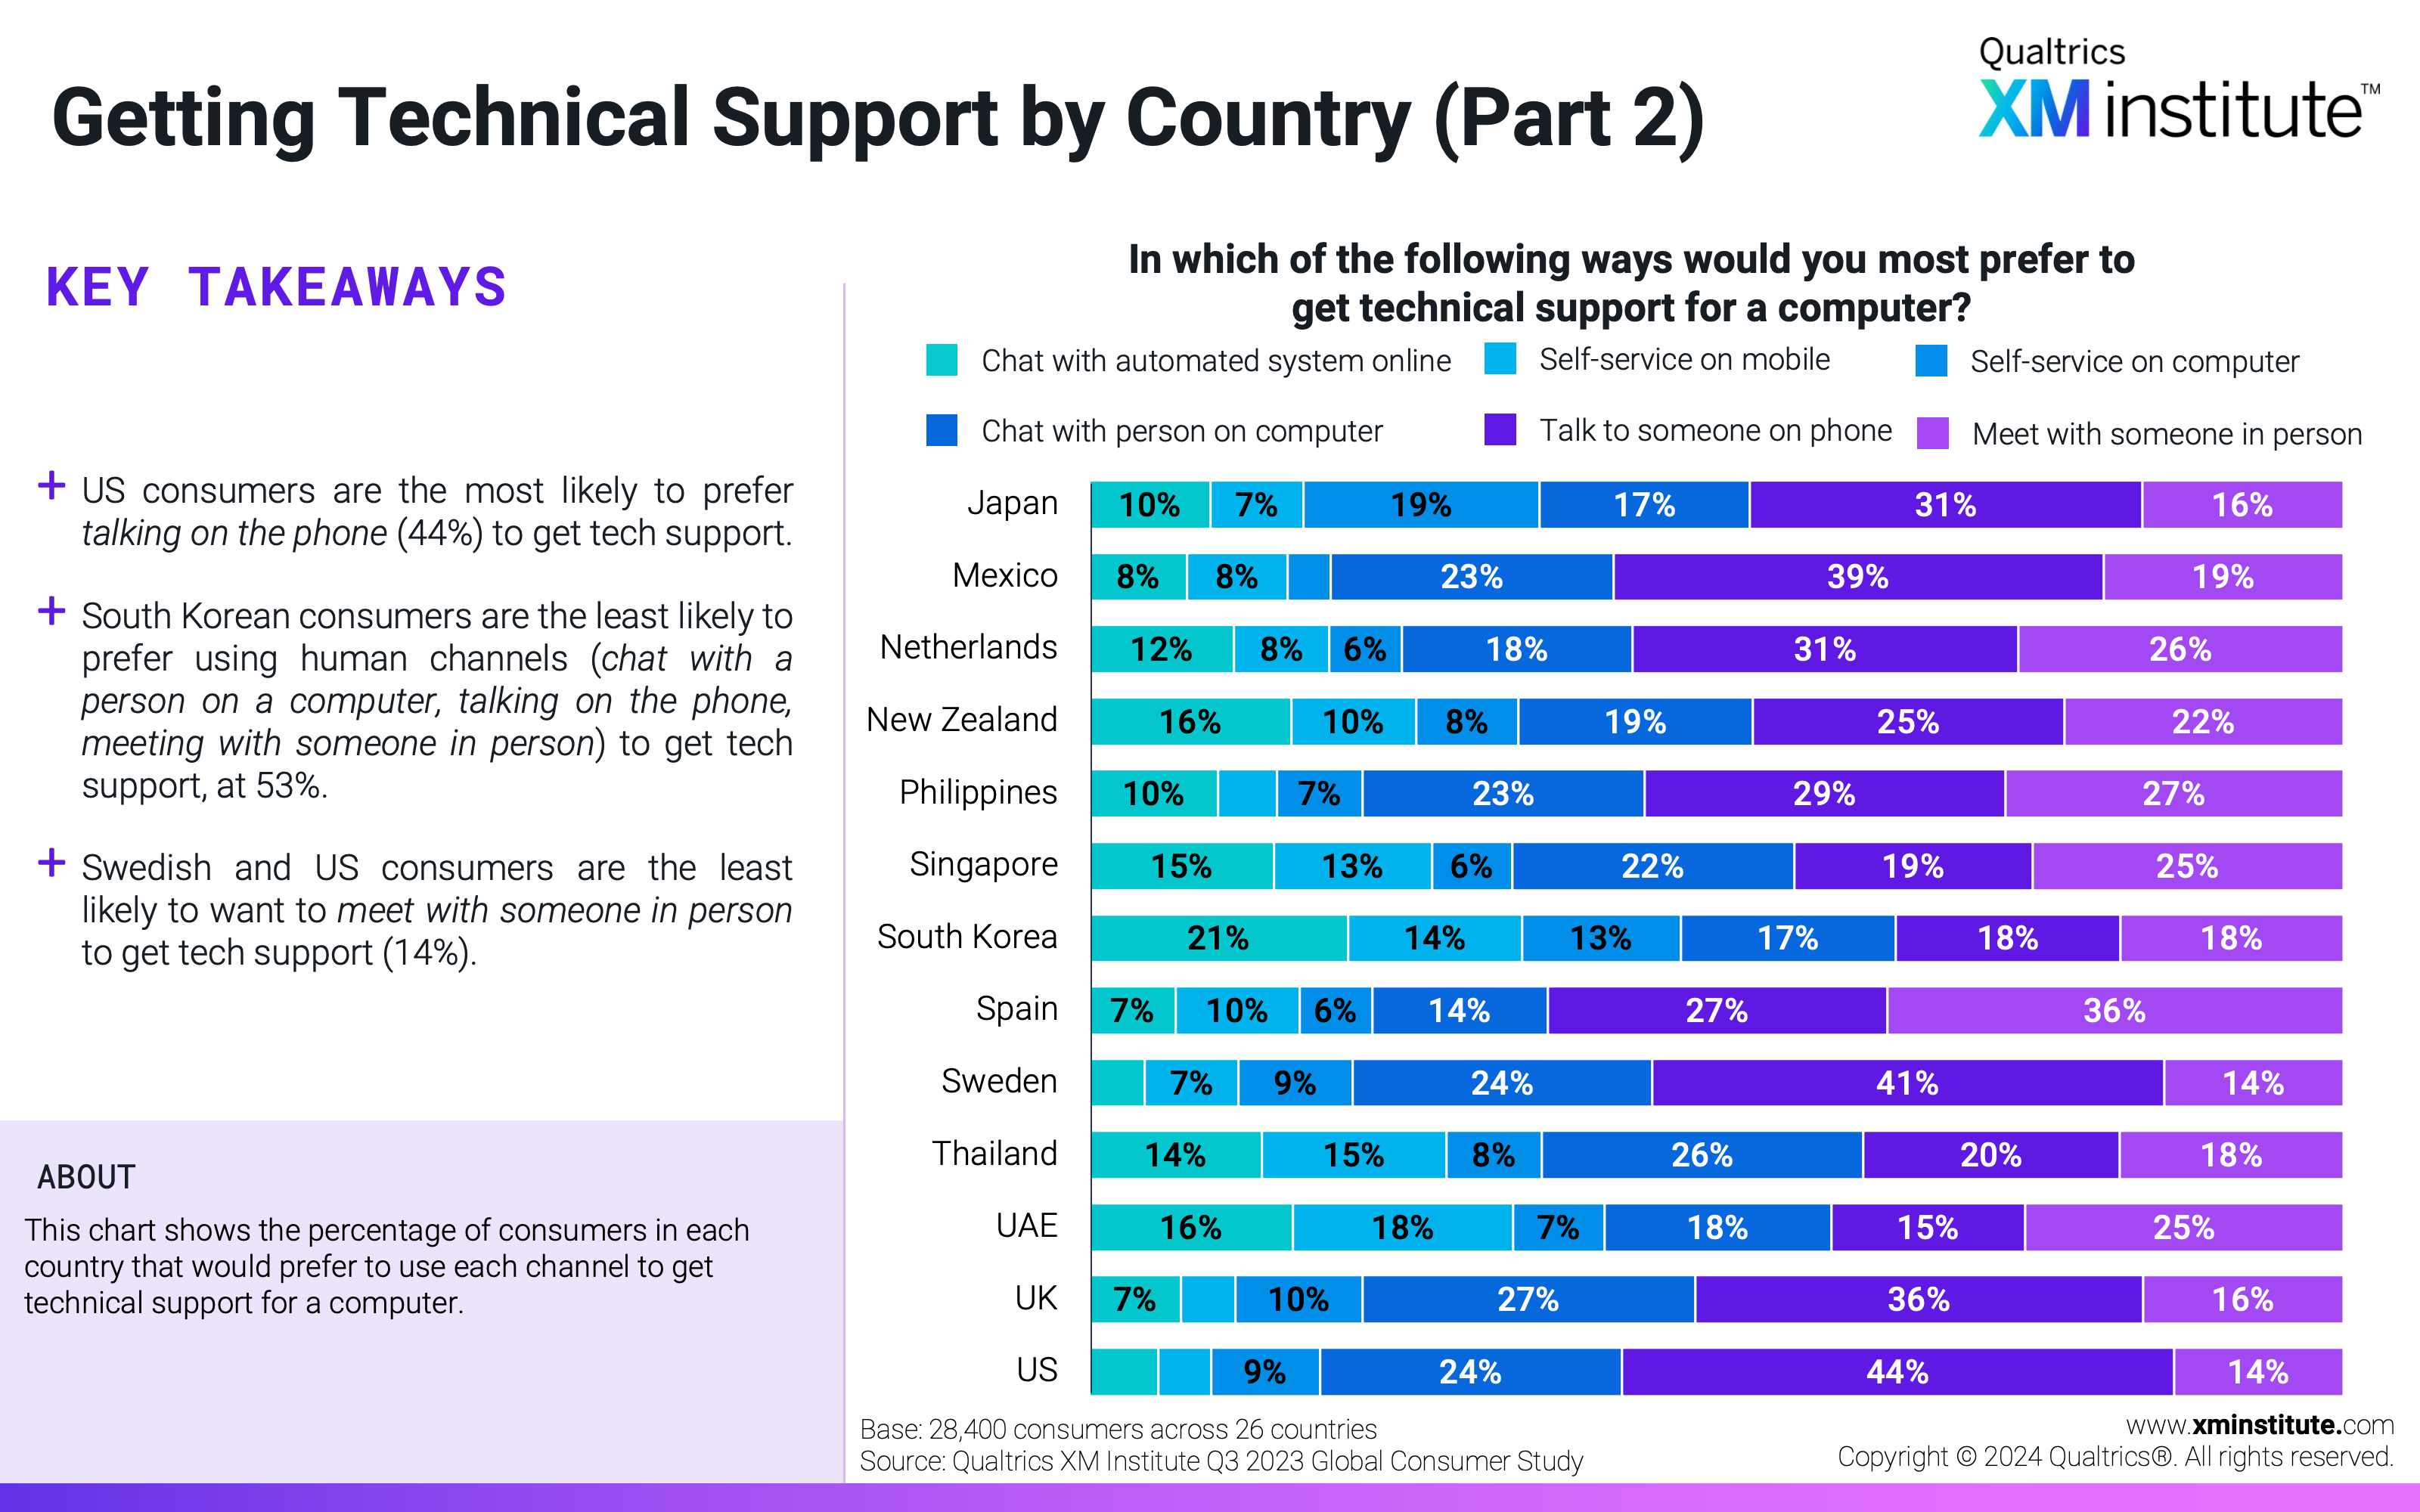 This chart shows the percentage of consumers in each country that would prefer to use each channel to get technical support for a computer. 